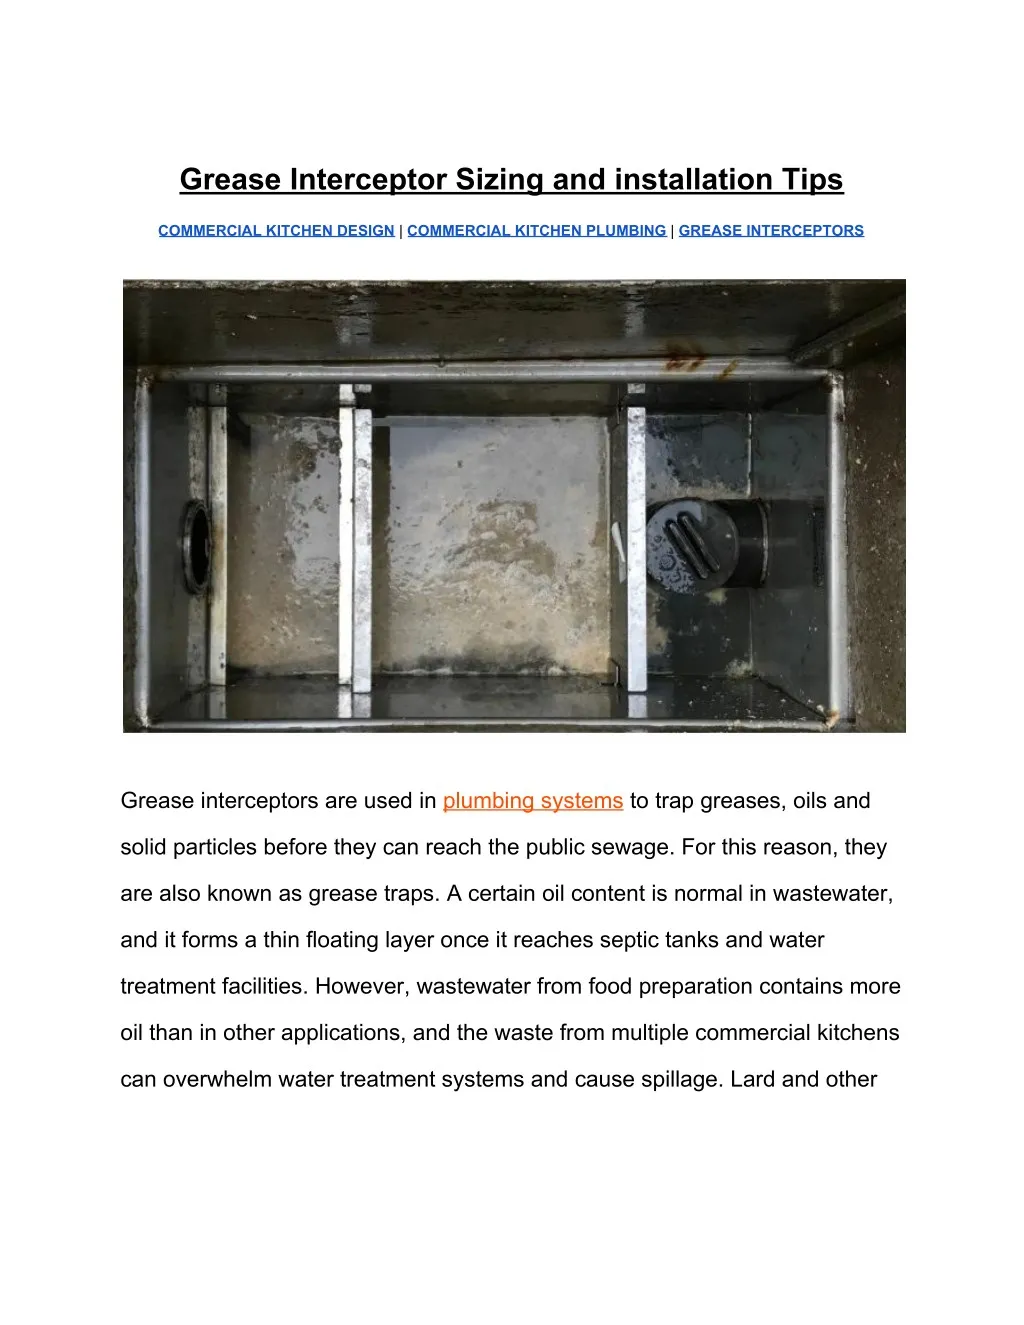 grease interceptor sizing and installation tips